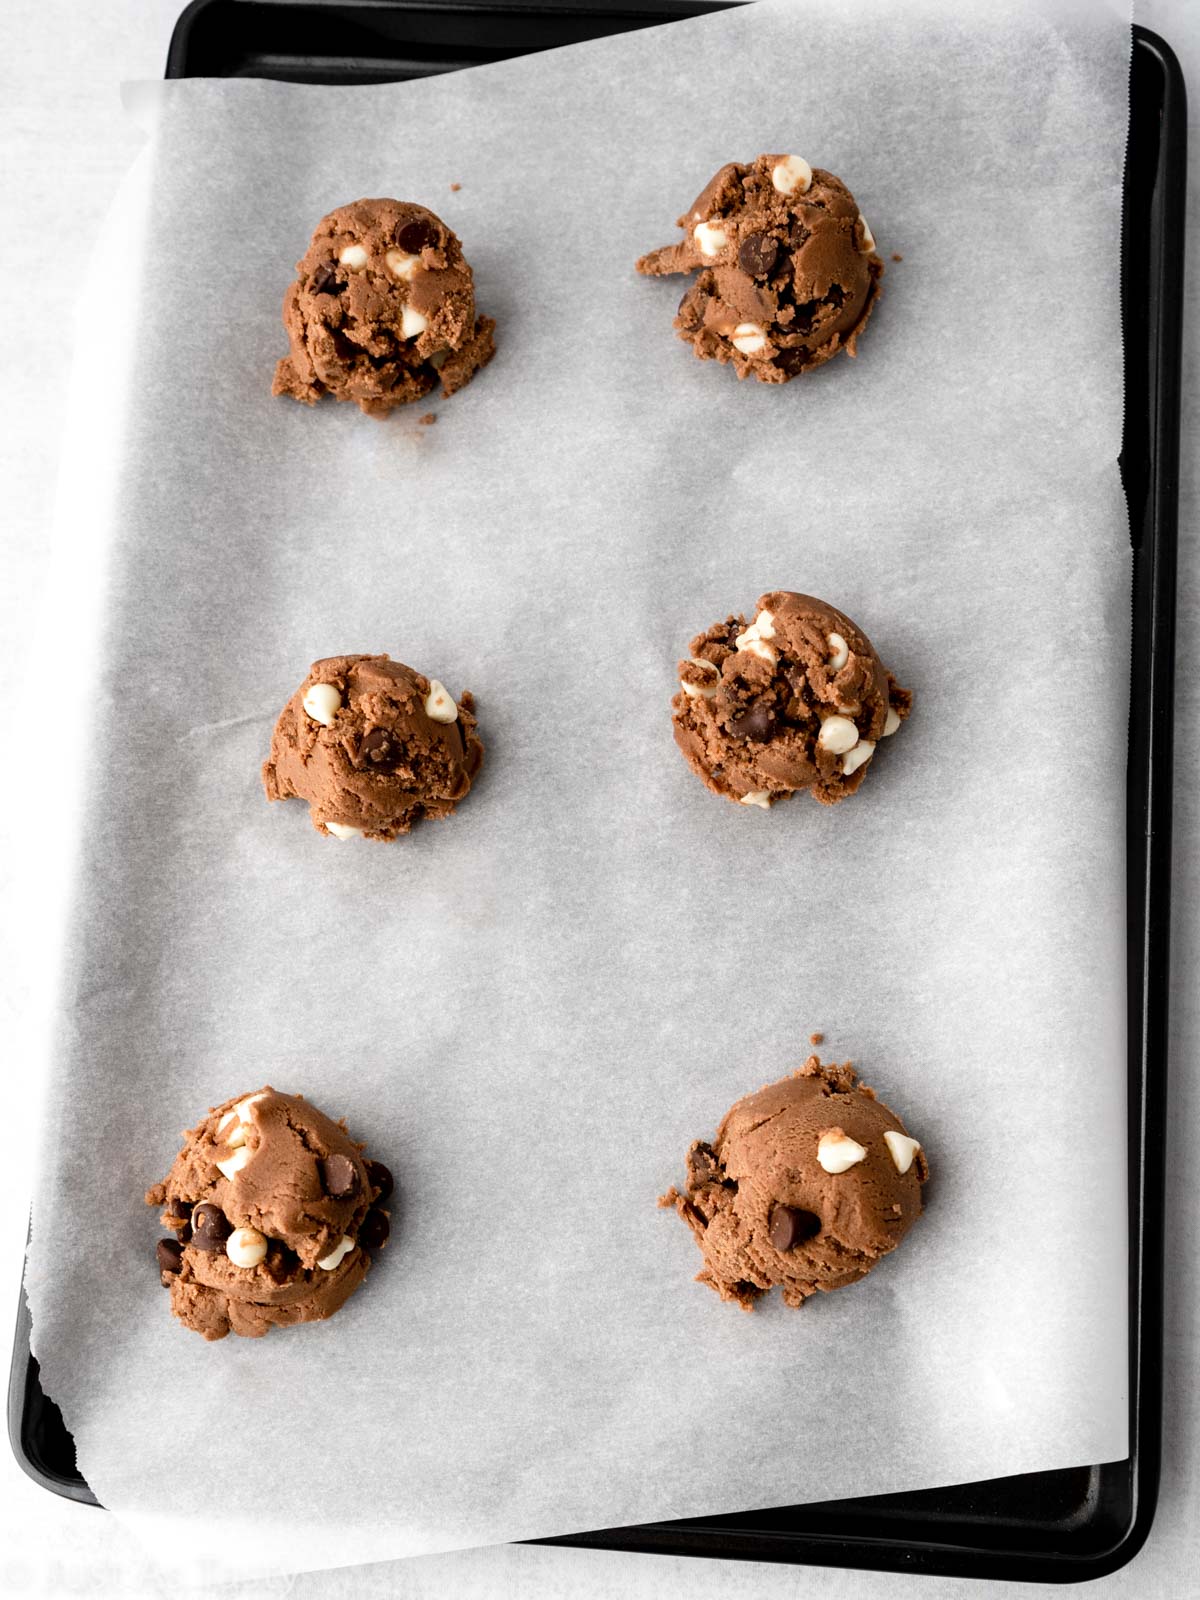 Scoops of cookie dough on a baking sheet.